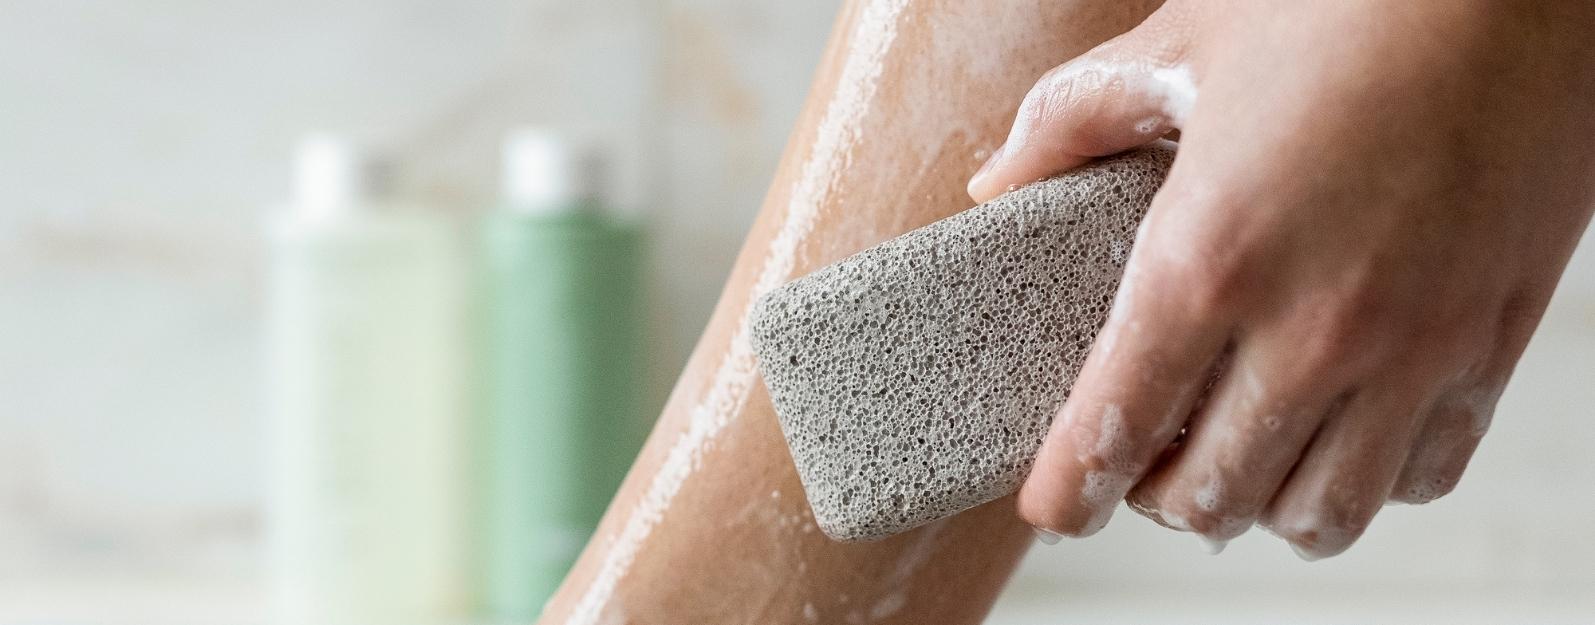 How To Use A Pumice Stone